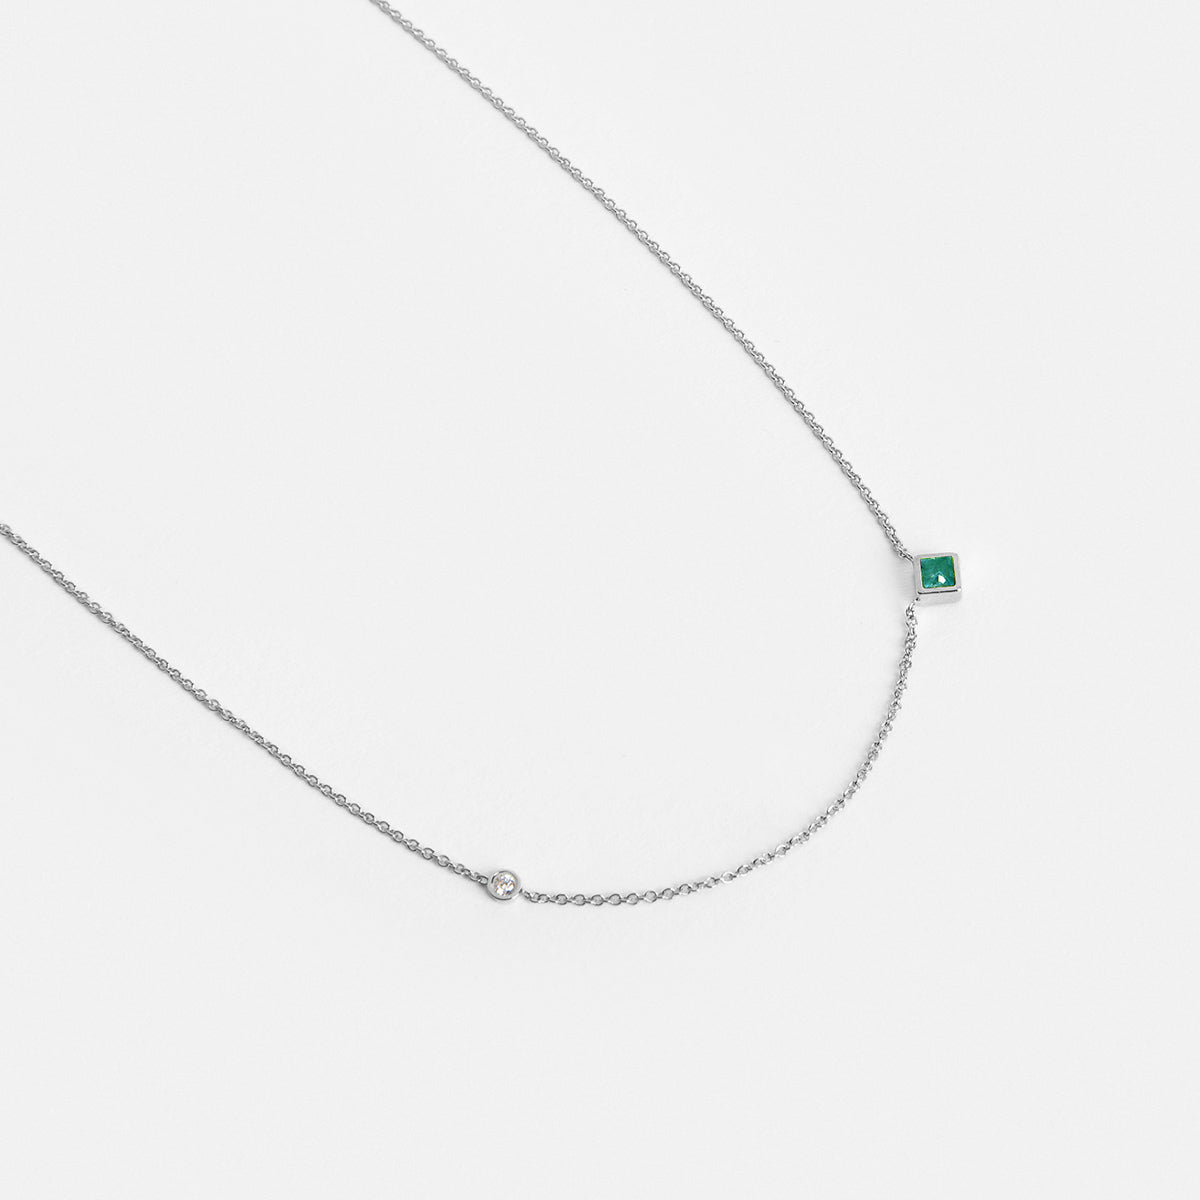 Isu Unique Necklace in 14k White Gold set with Emerald and White Diamond By SHW Fine Jewelry NYC